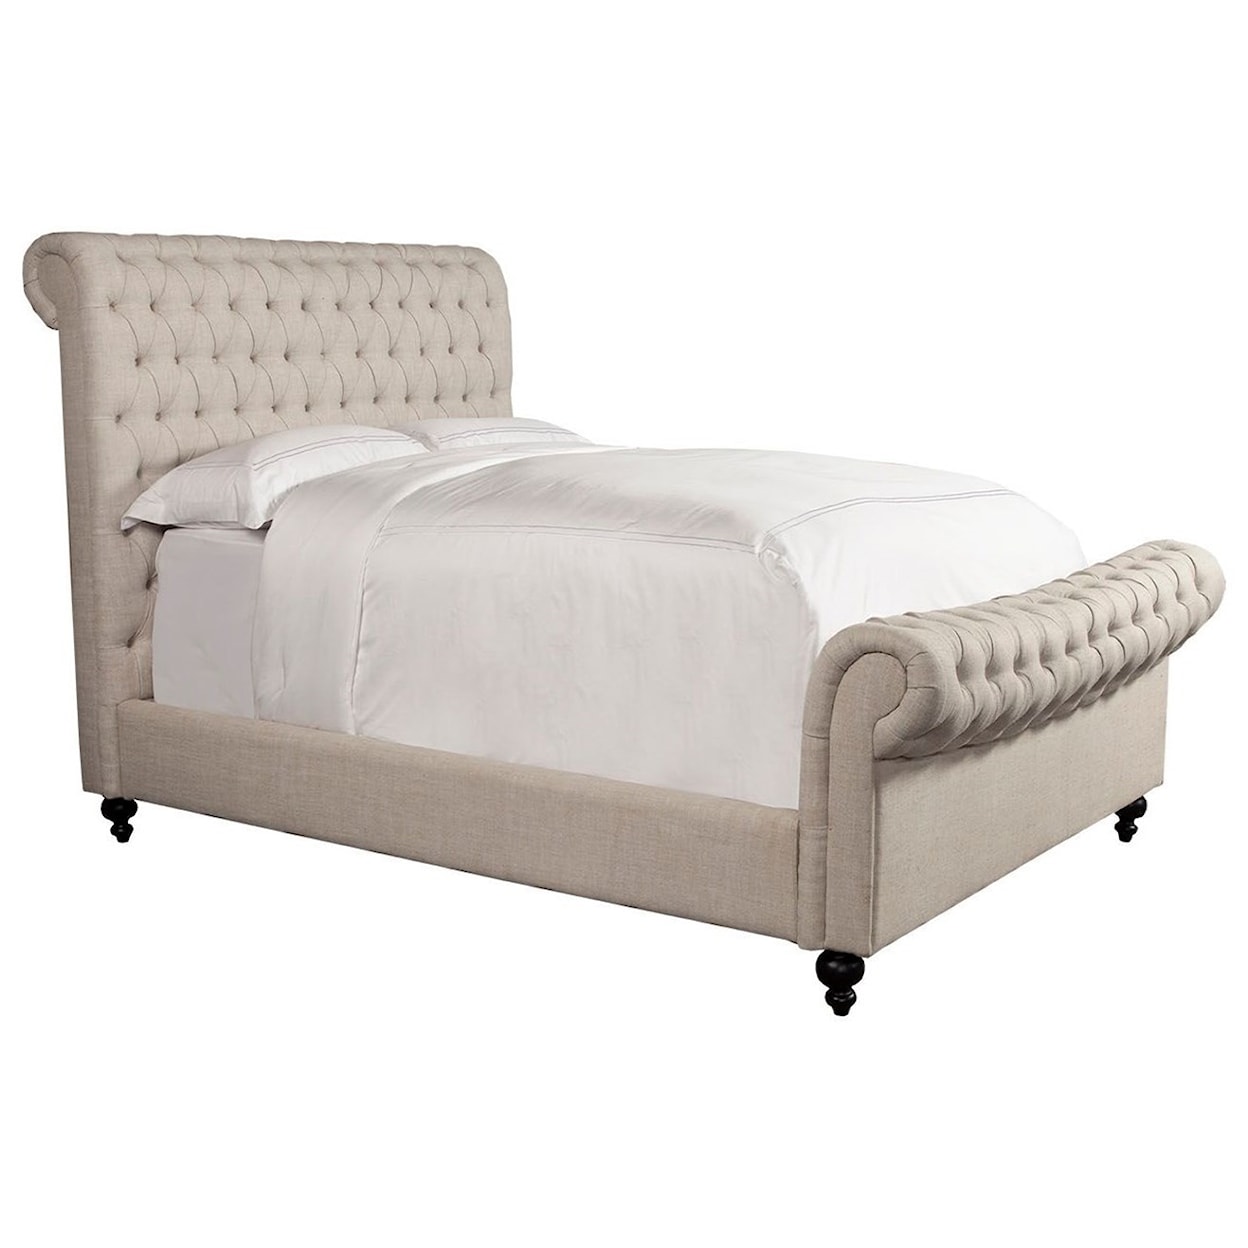 Parker Living Jackie Queen Upholstered Sleigh Bed